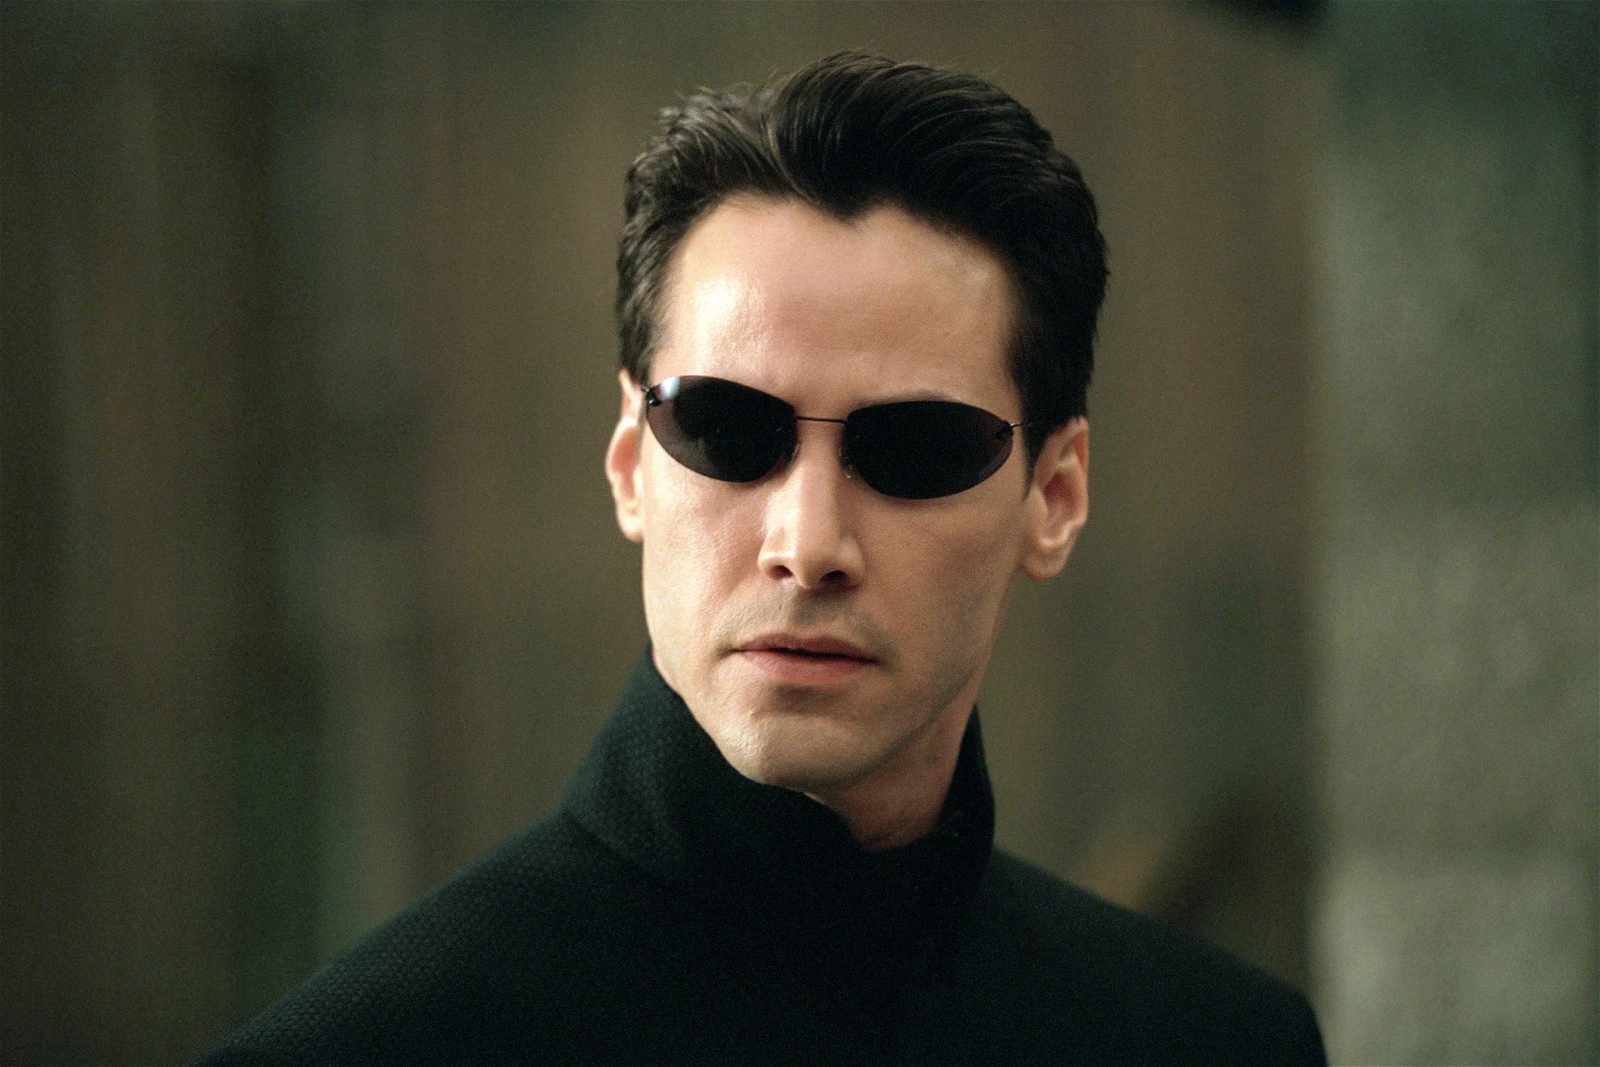 Keanu Reeves as Neo in The Matrix 